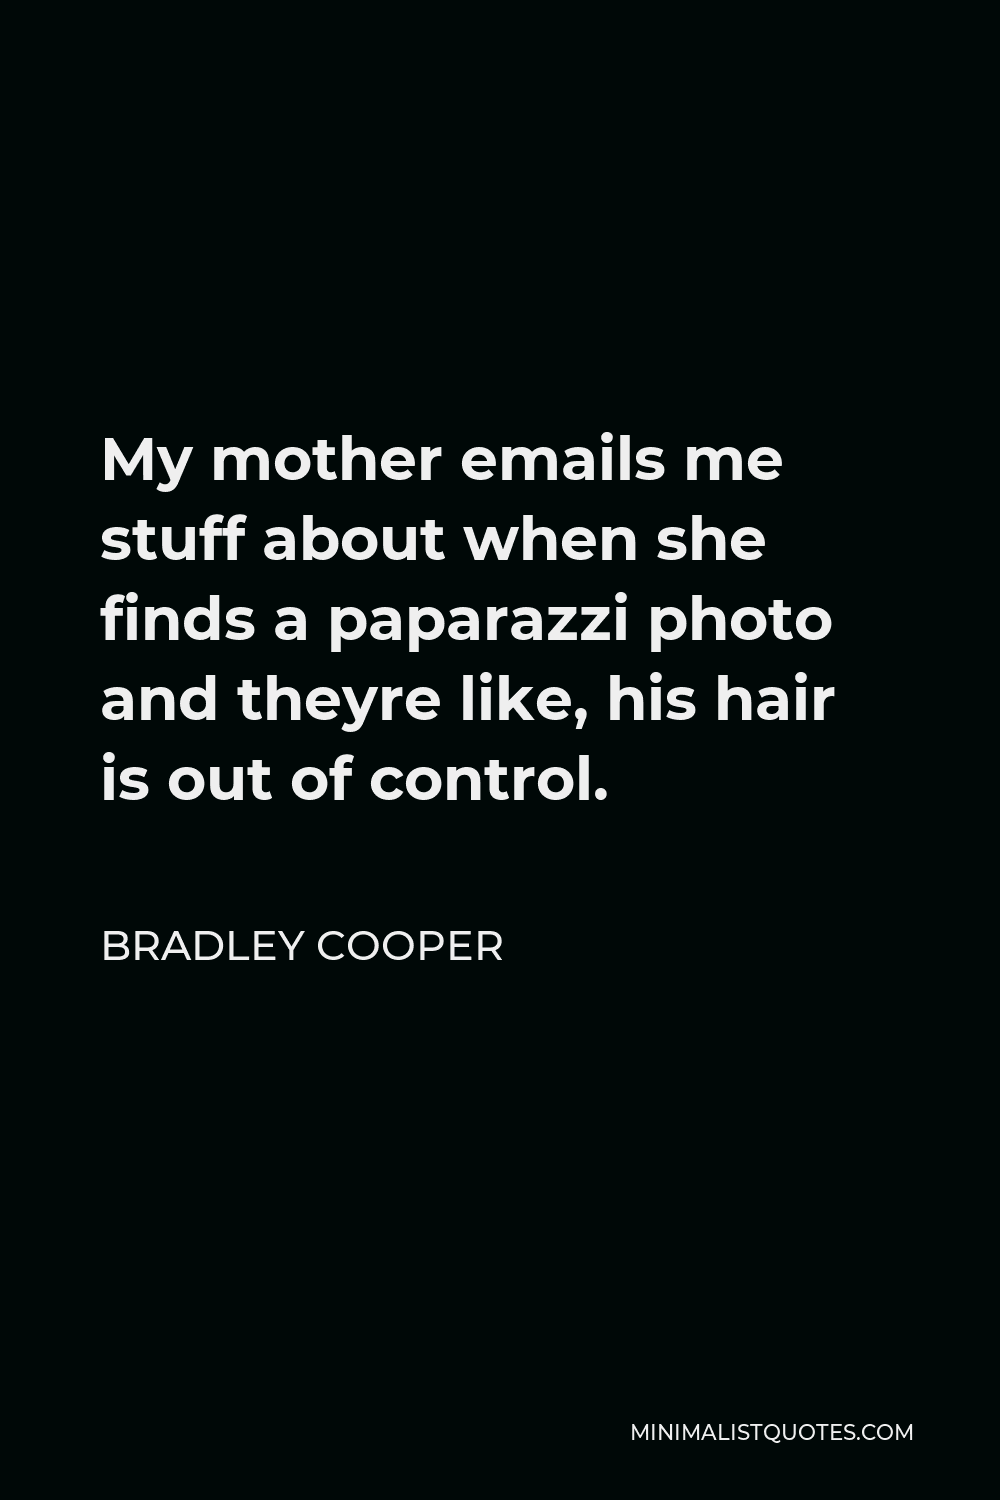 Bradley Cooper Quote - My mother emails me stuff about when she finds a paparazzi photo and theyre like, his hair is out of control.